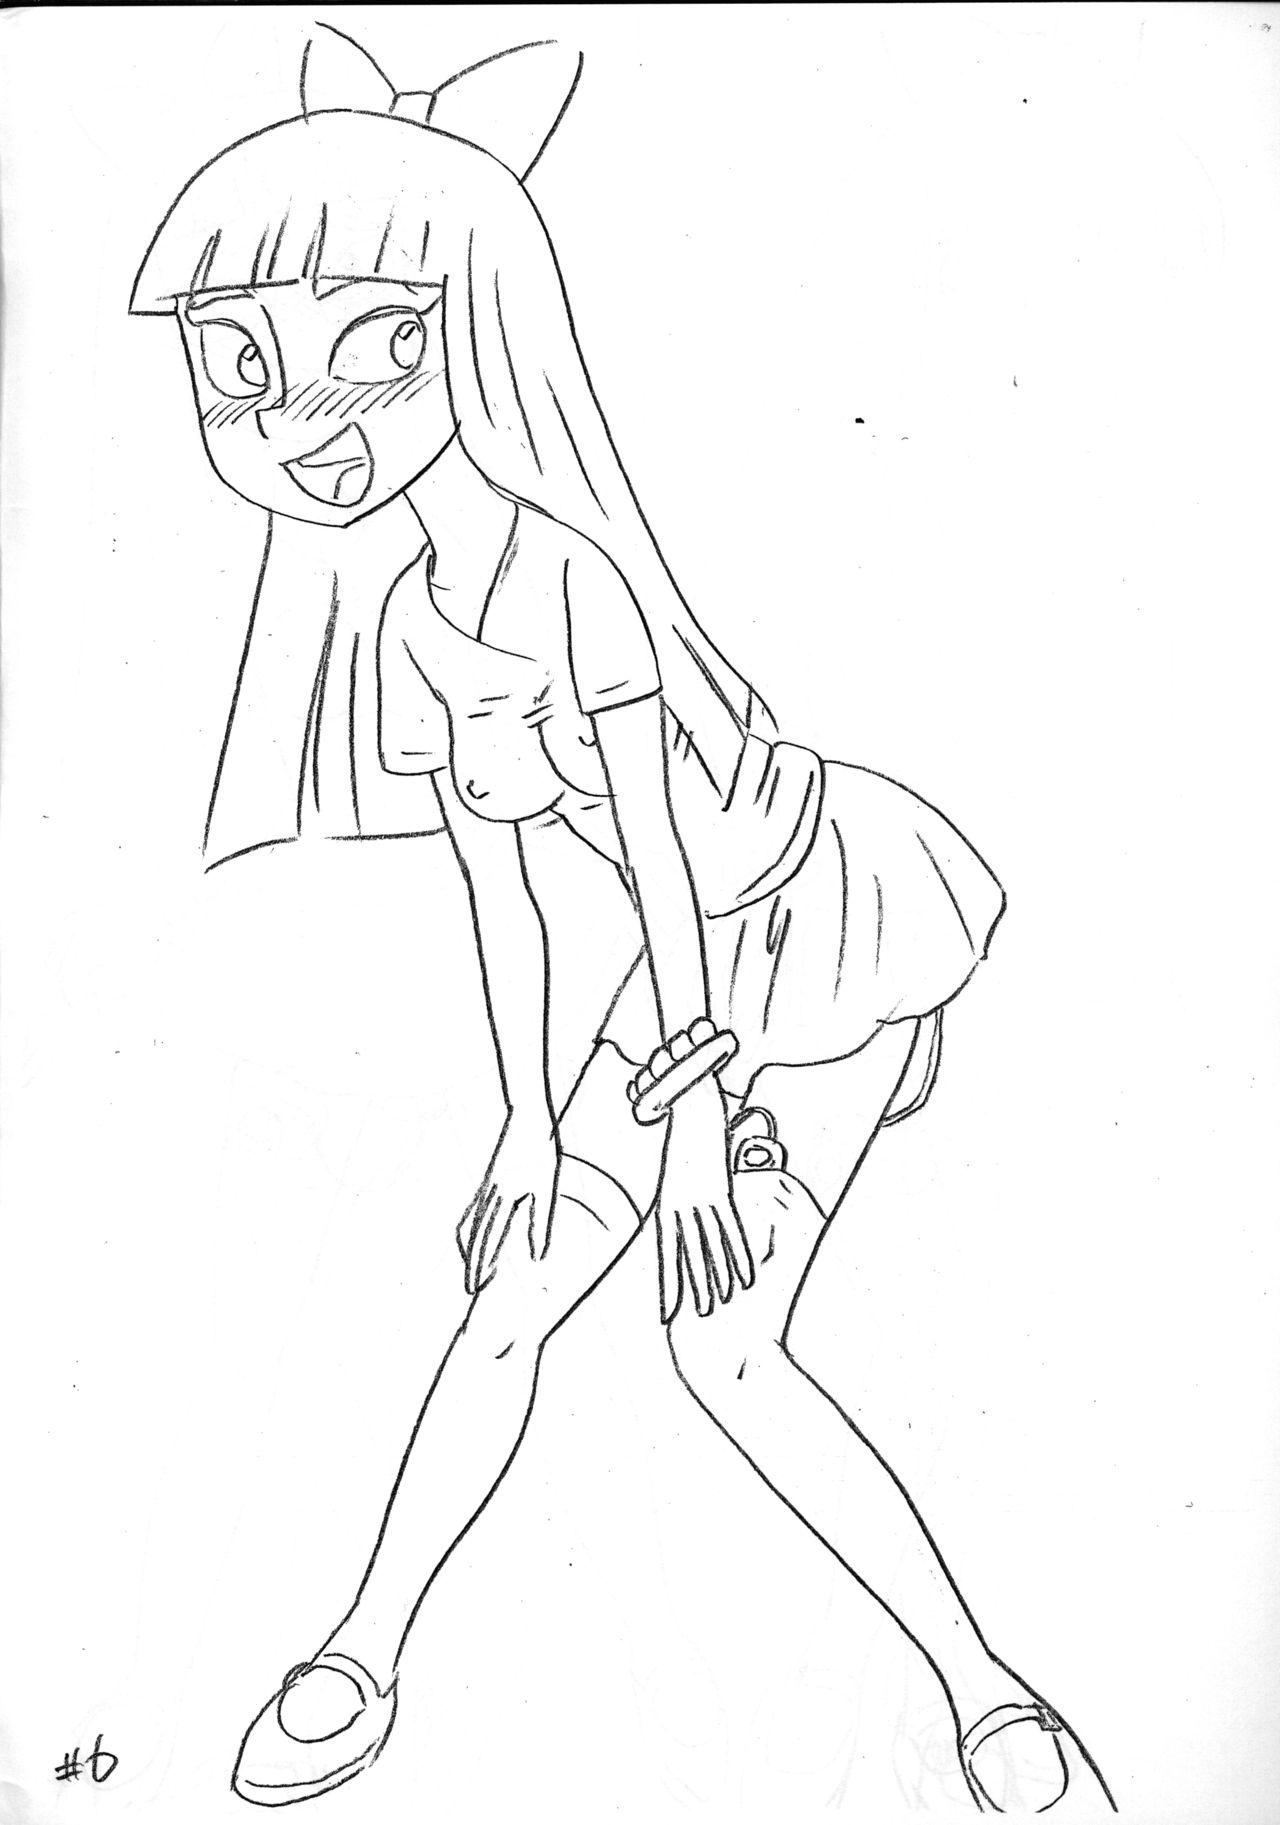 Classy Psychosomatic Counterfeit Ex: Stacy in A.S. - Phineas and ferb Voyeursex - Page 5